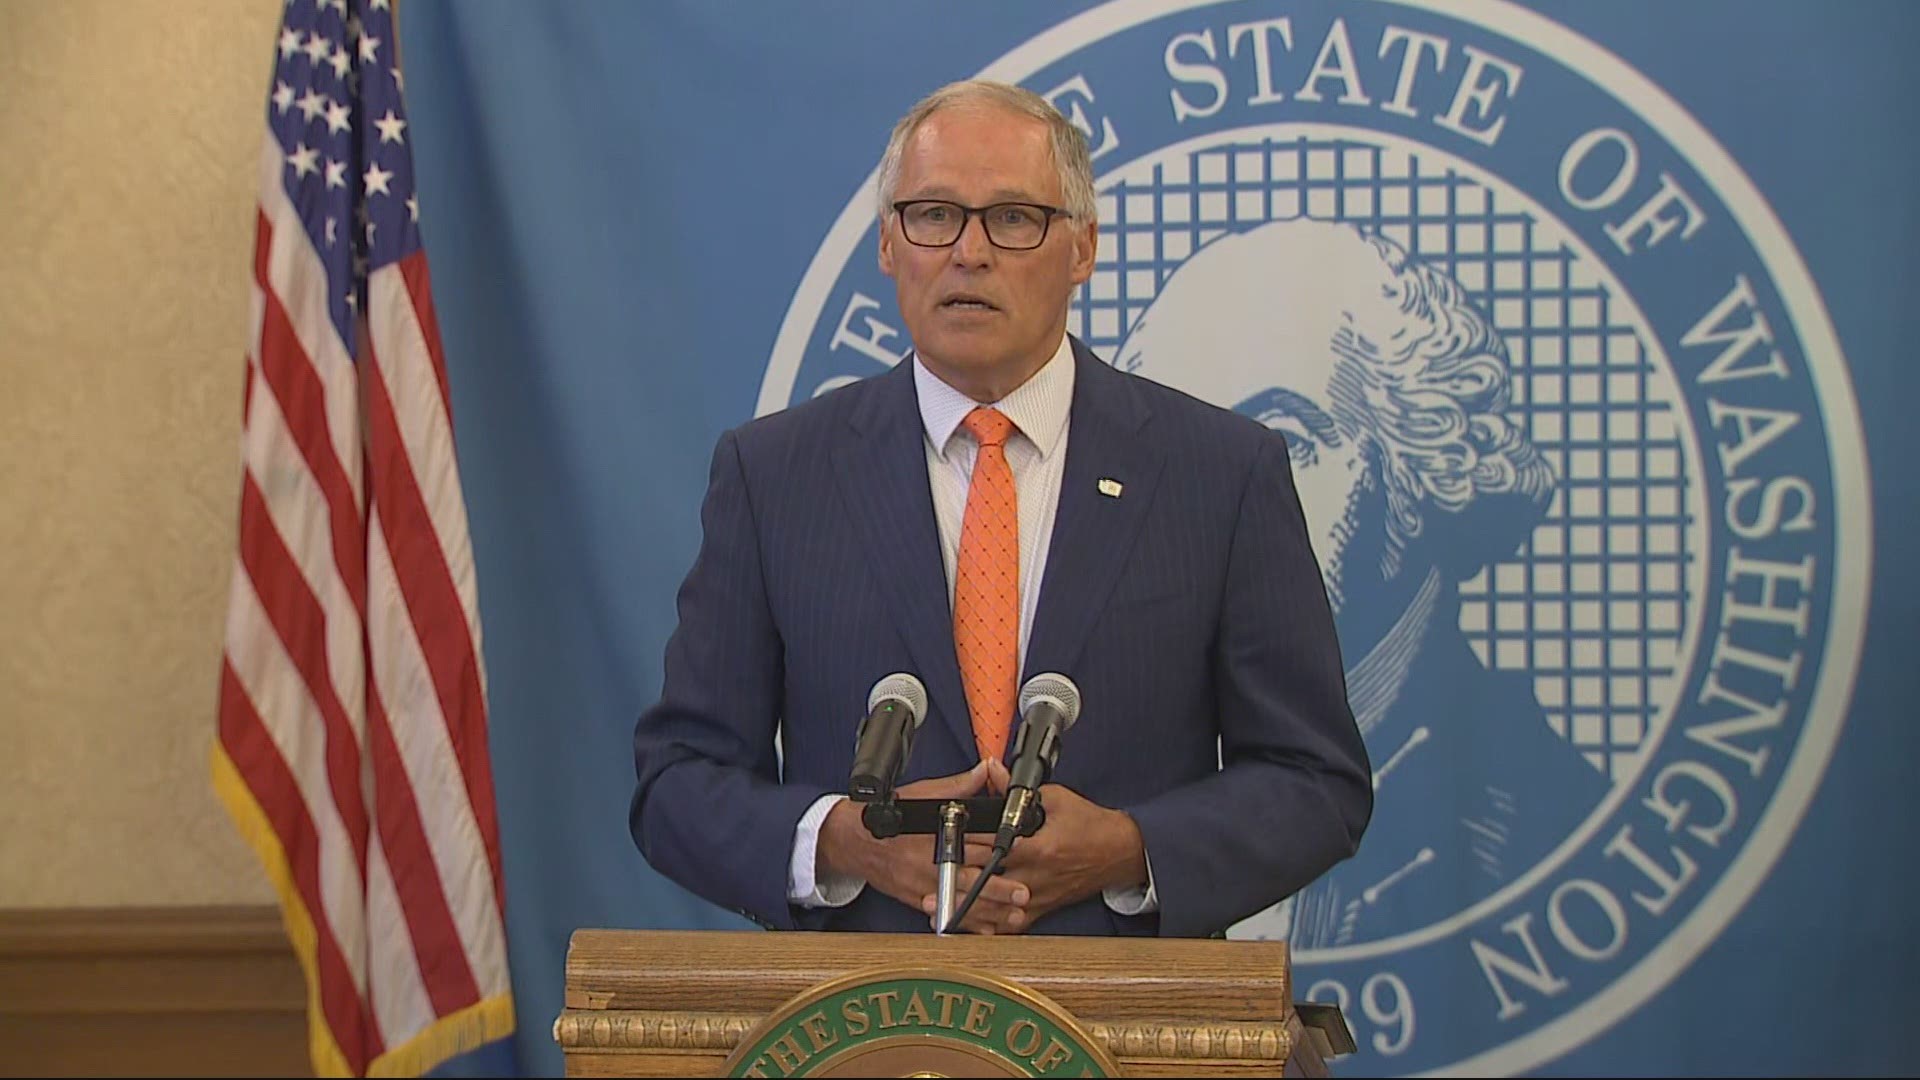 Washington Gov. Jay Inslee announced schools will require masks this fall and requested Washington residents resume wearing masks in public settings.